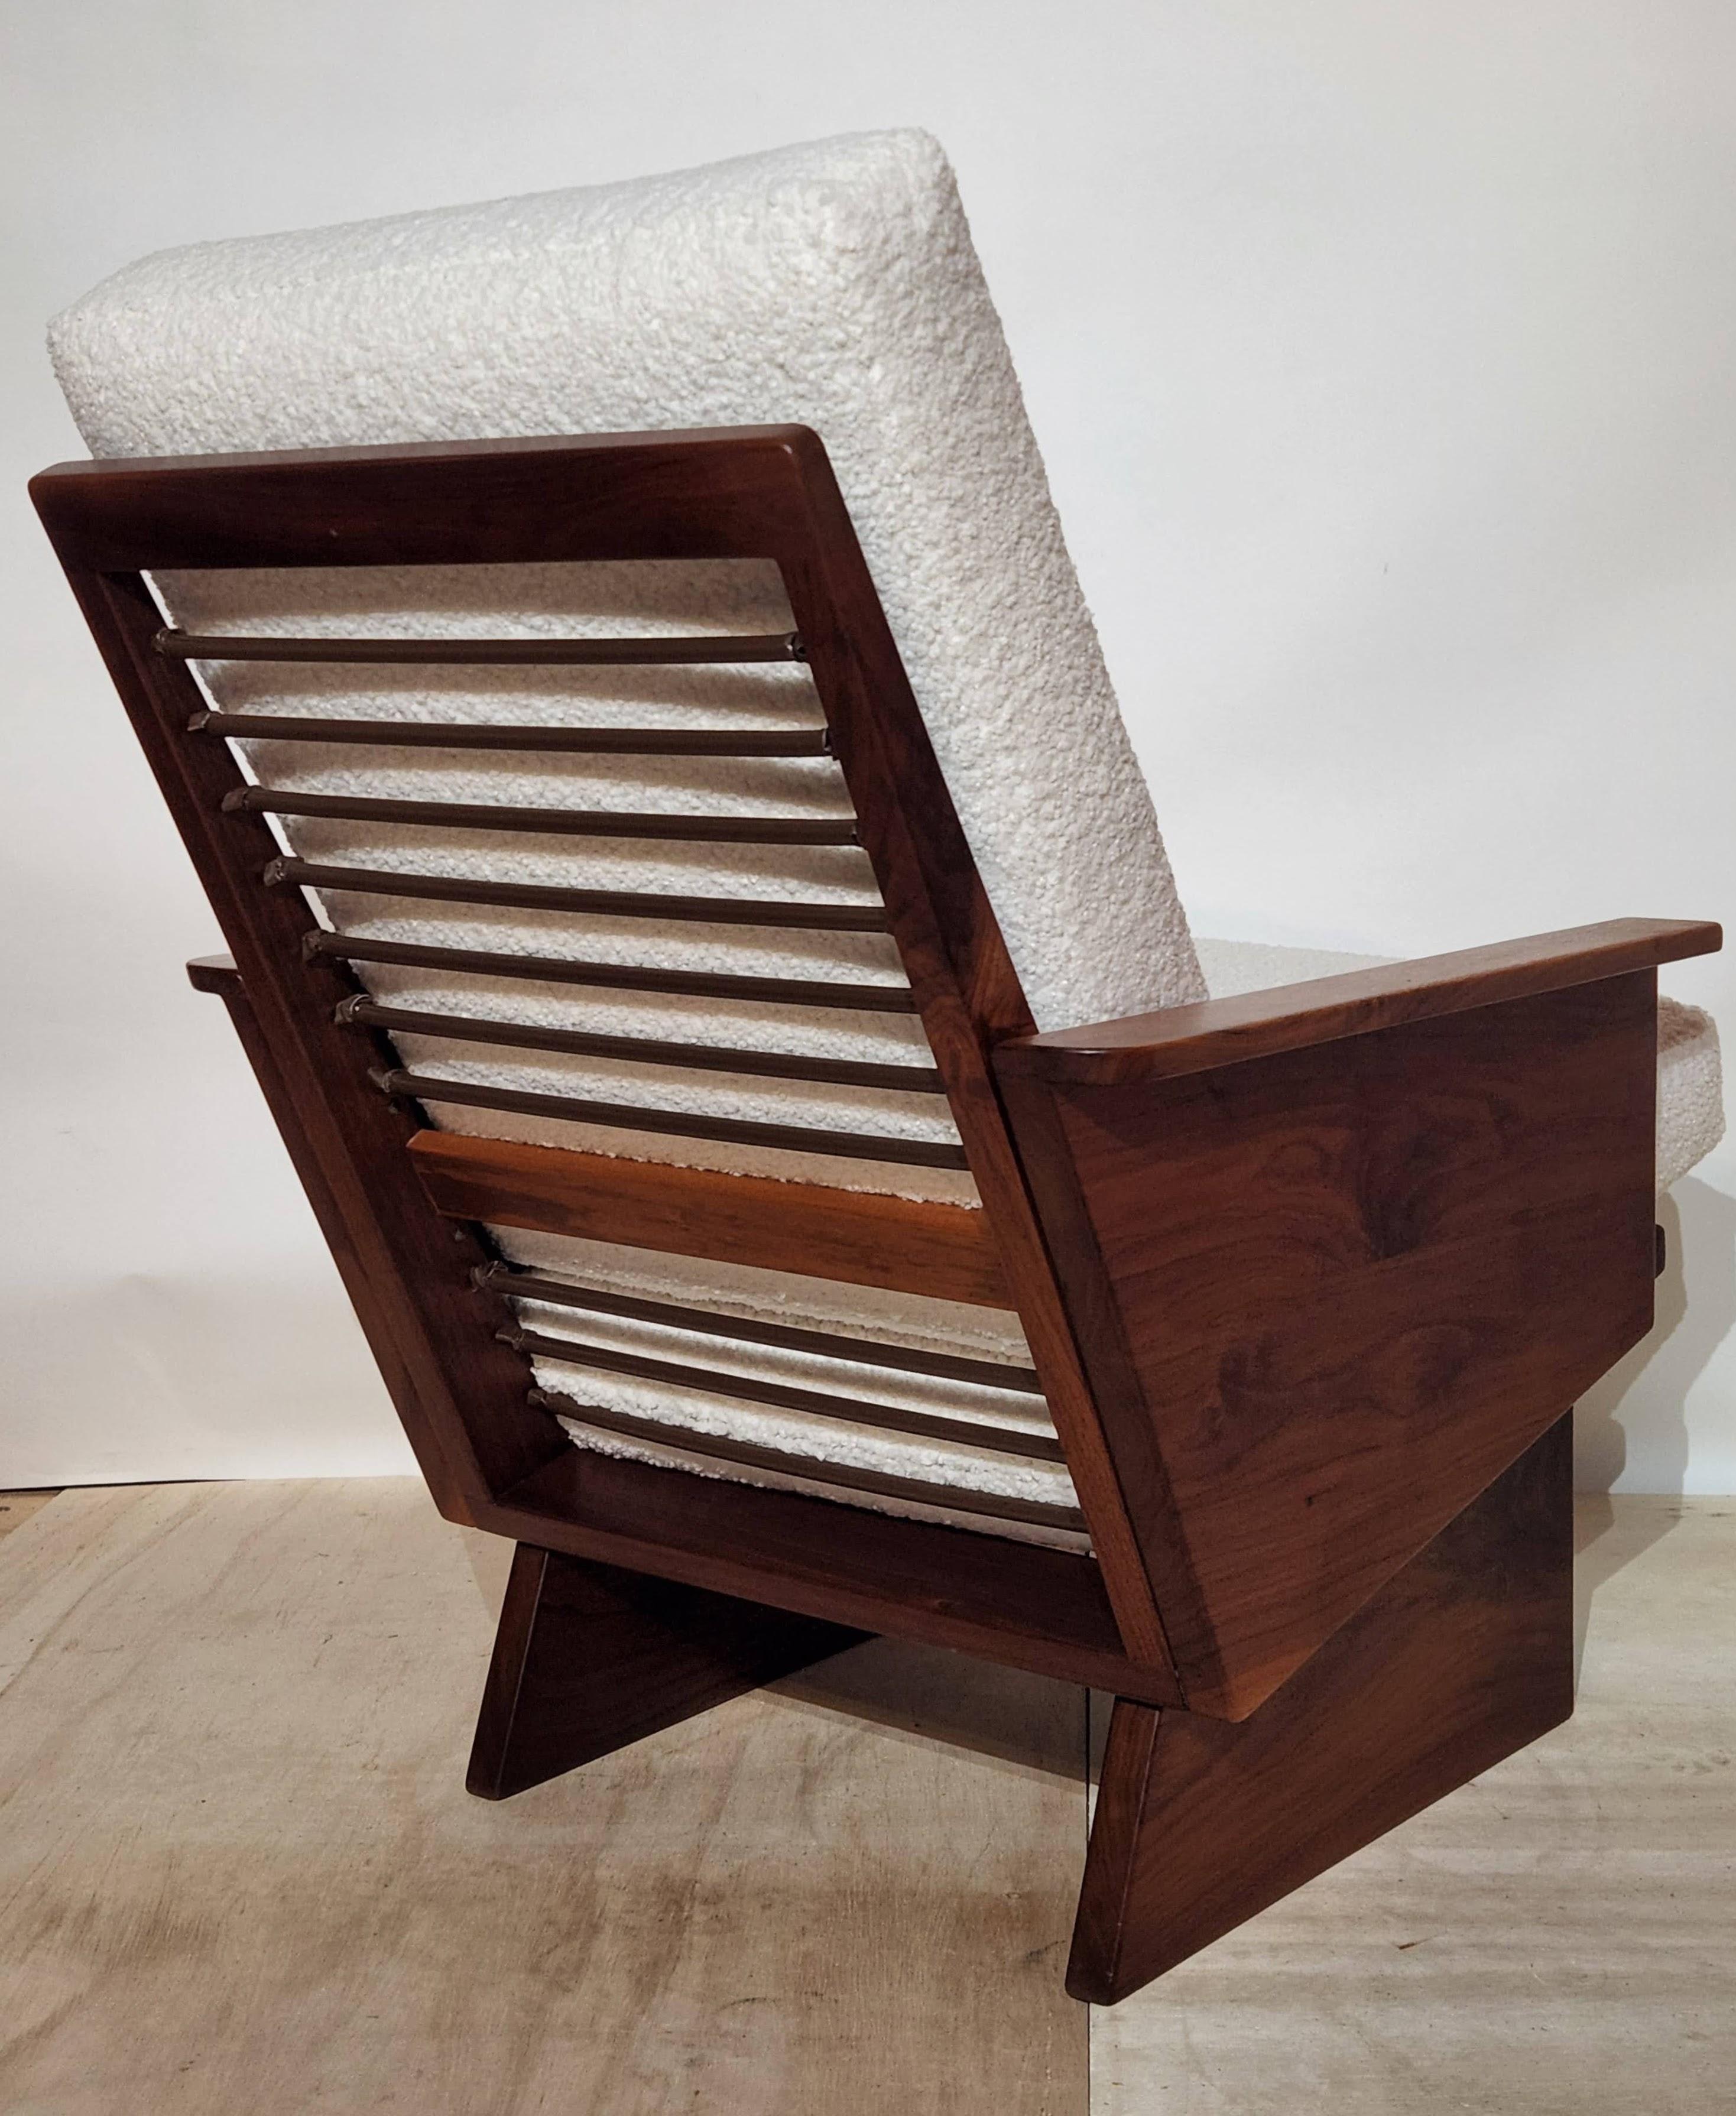 Hand-Crafted Arden Riddle High Back Lounge Chair Studio Crafted, 1988